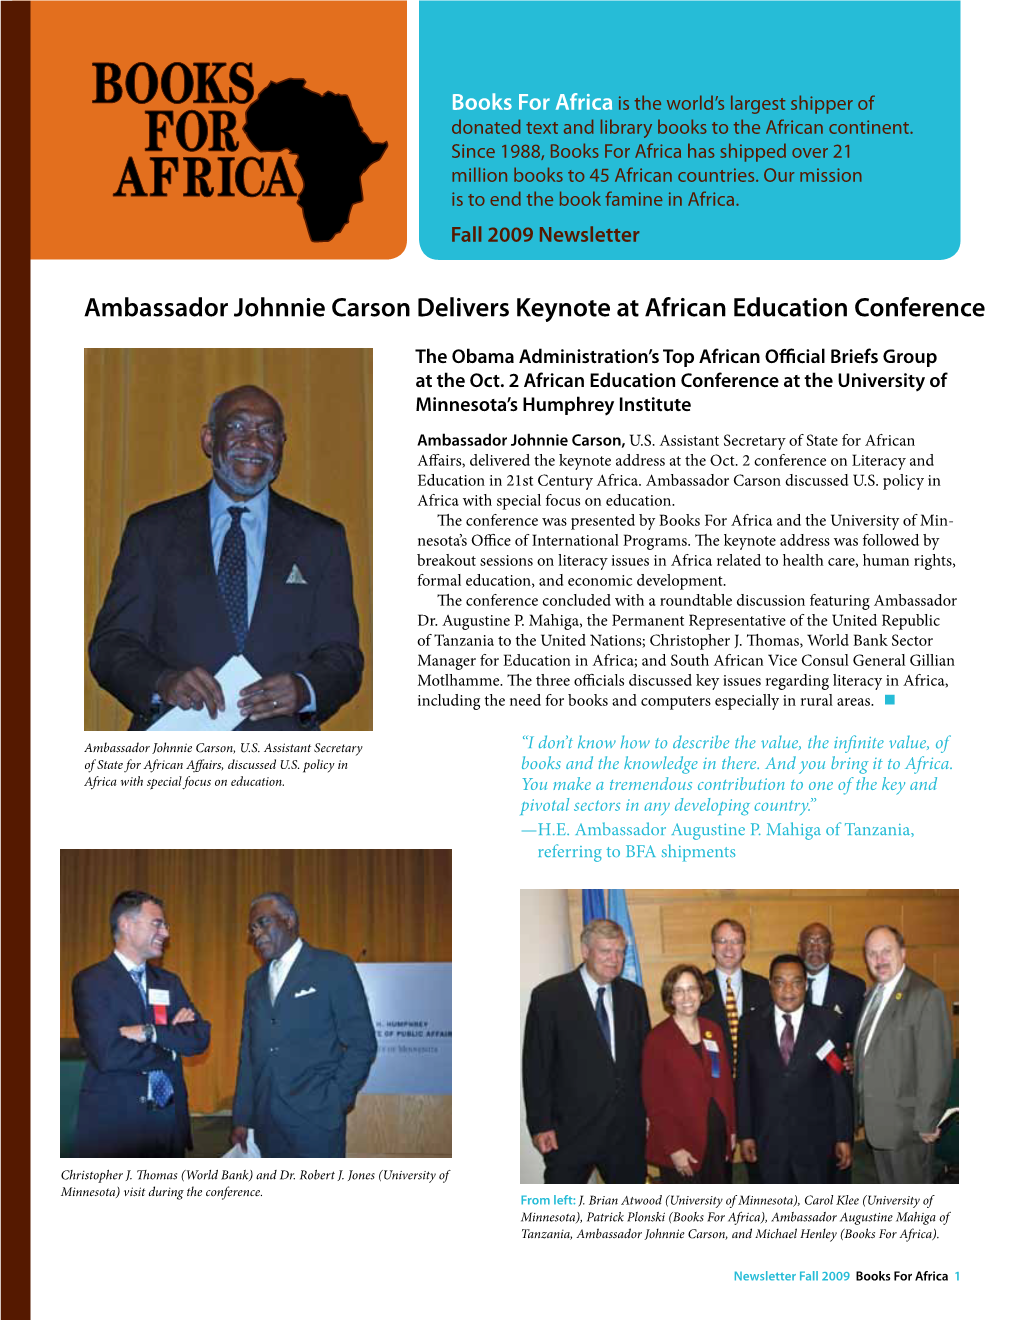 Ambassador Johnnie Carson Delivers Keynote at African Education Conference